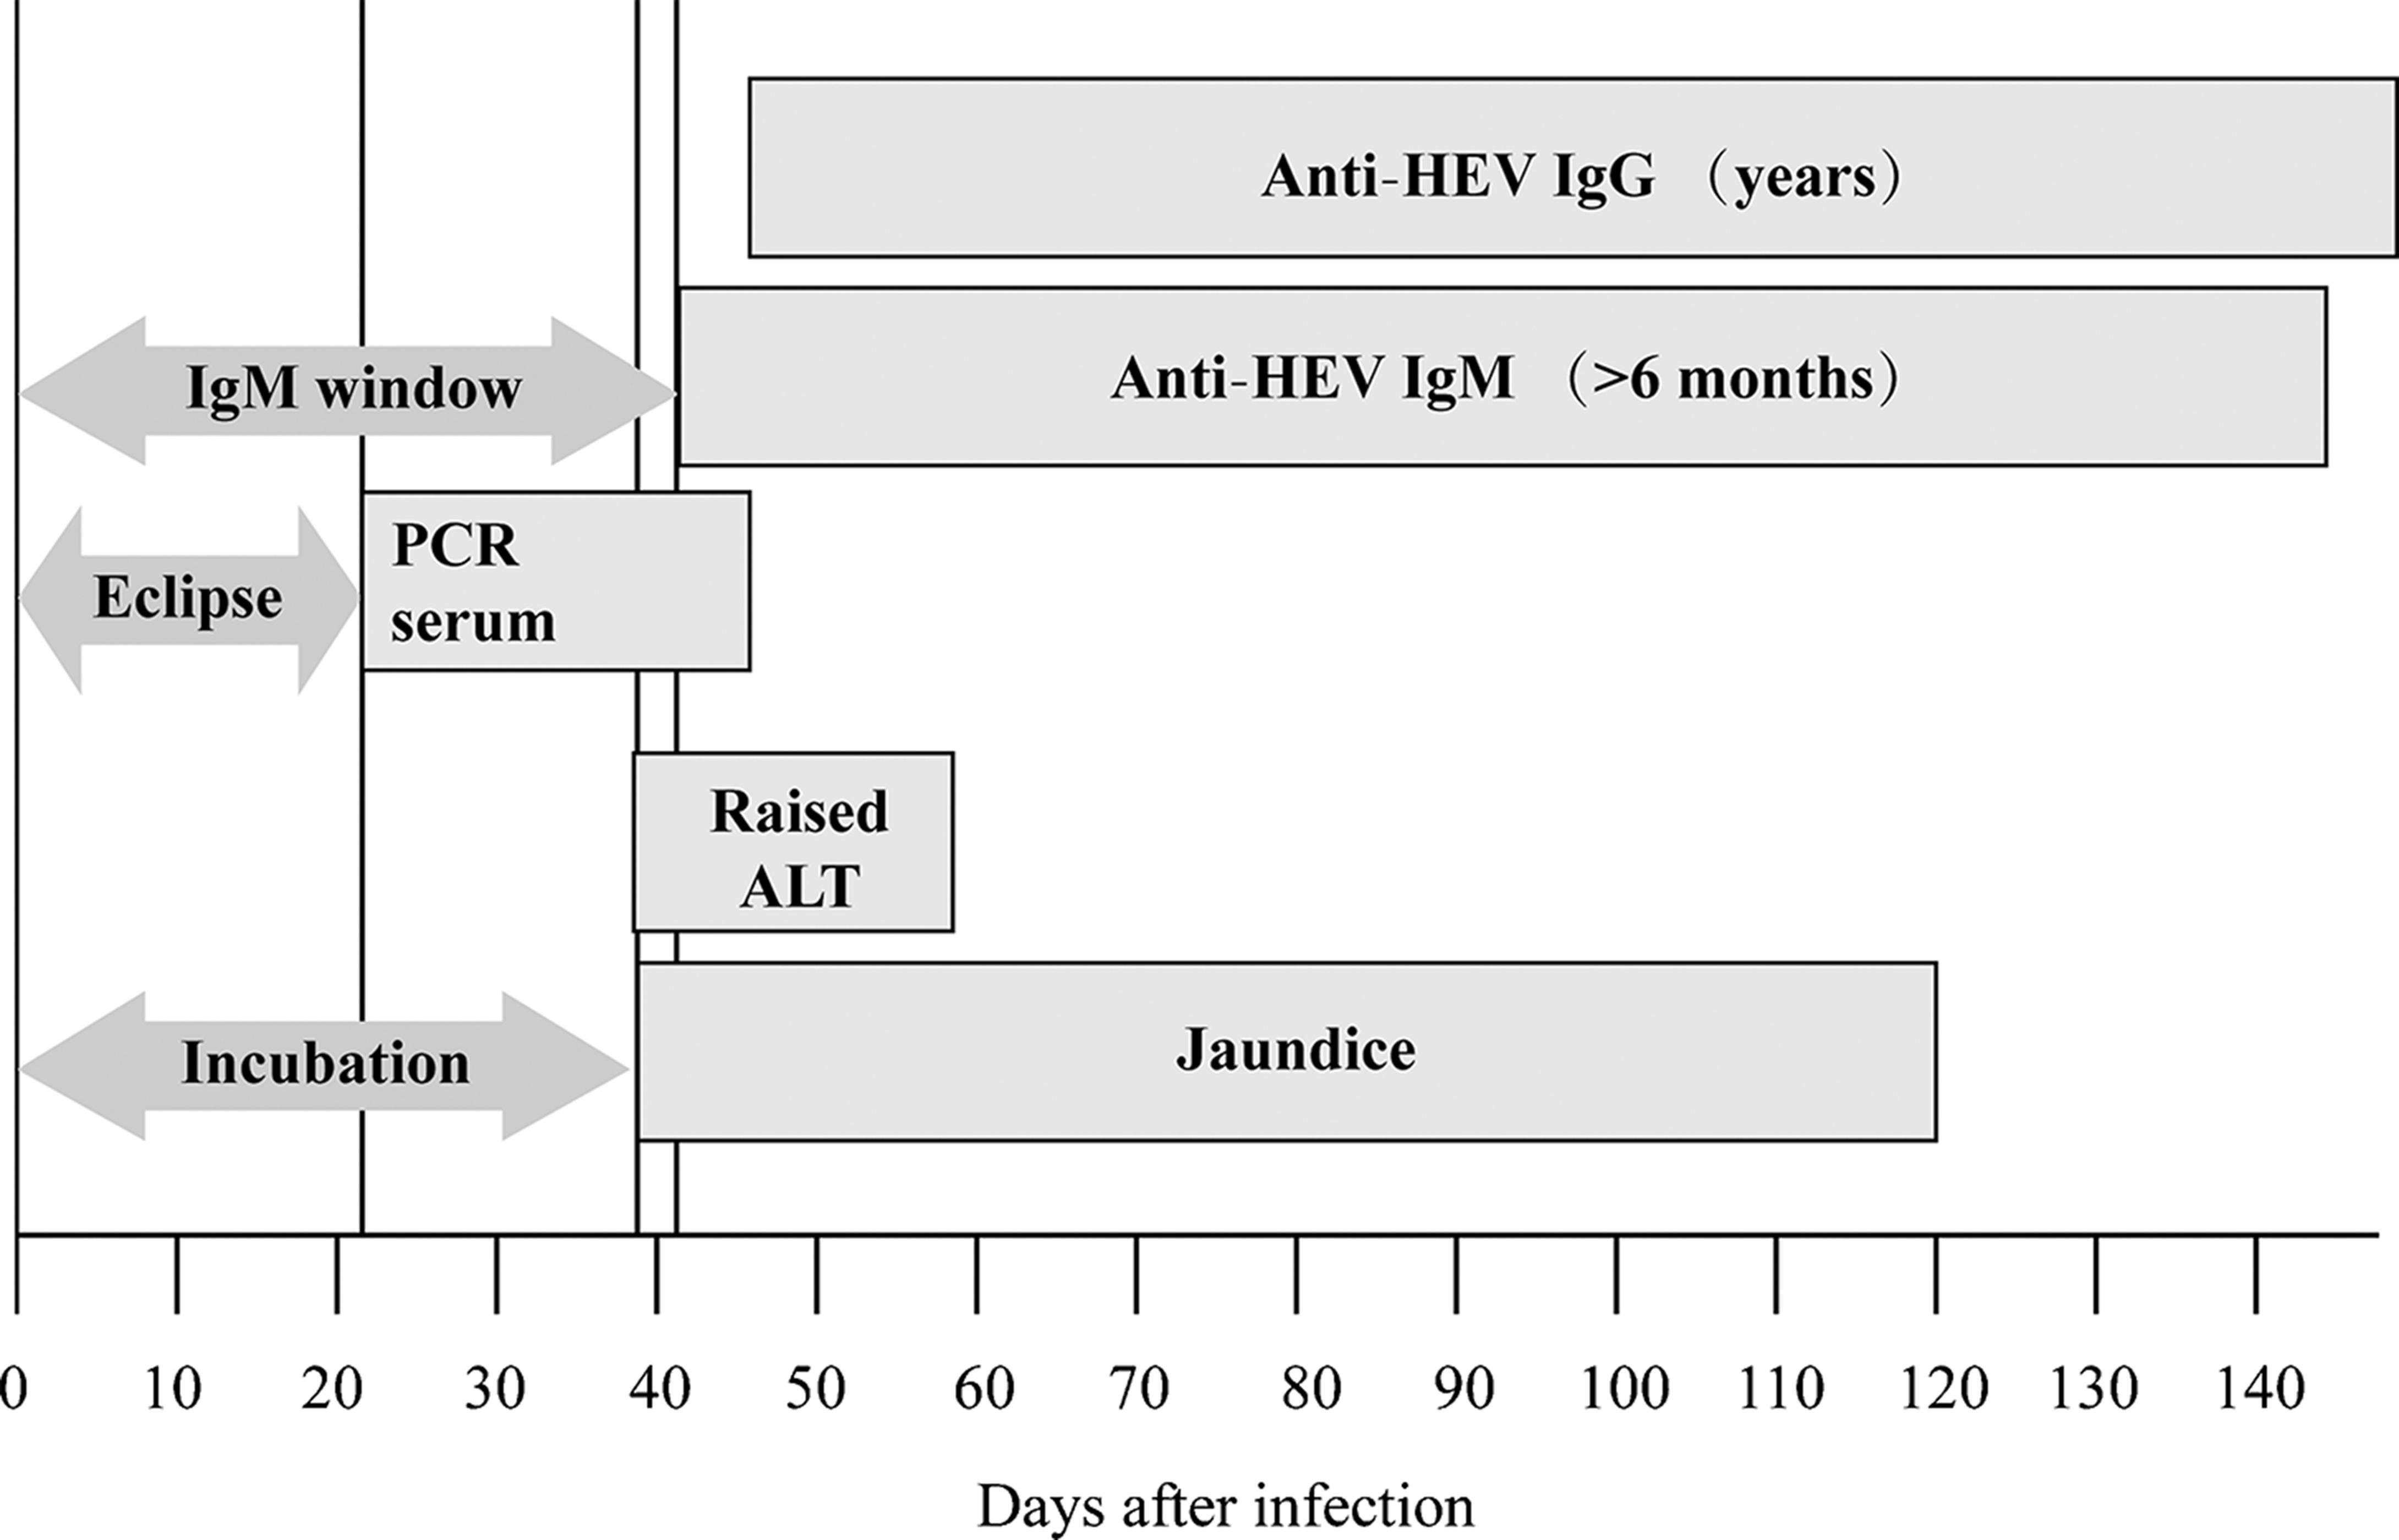 Evolution of viral diagnostic markers in serum during acute hepatitis E